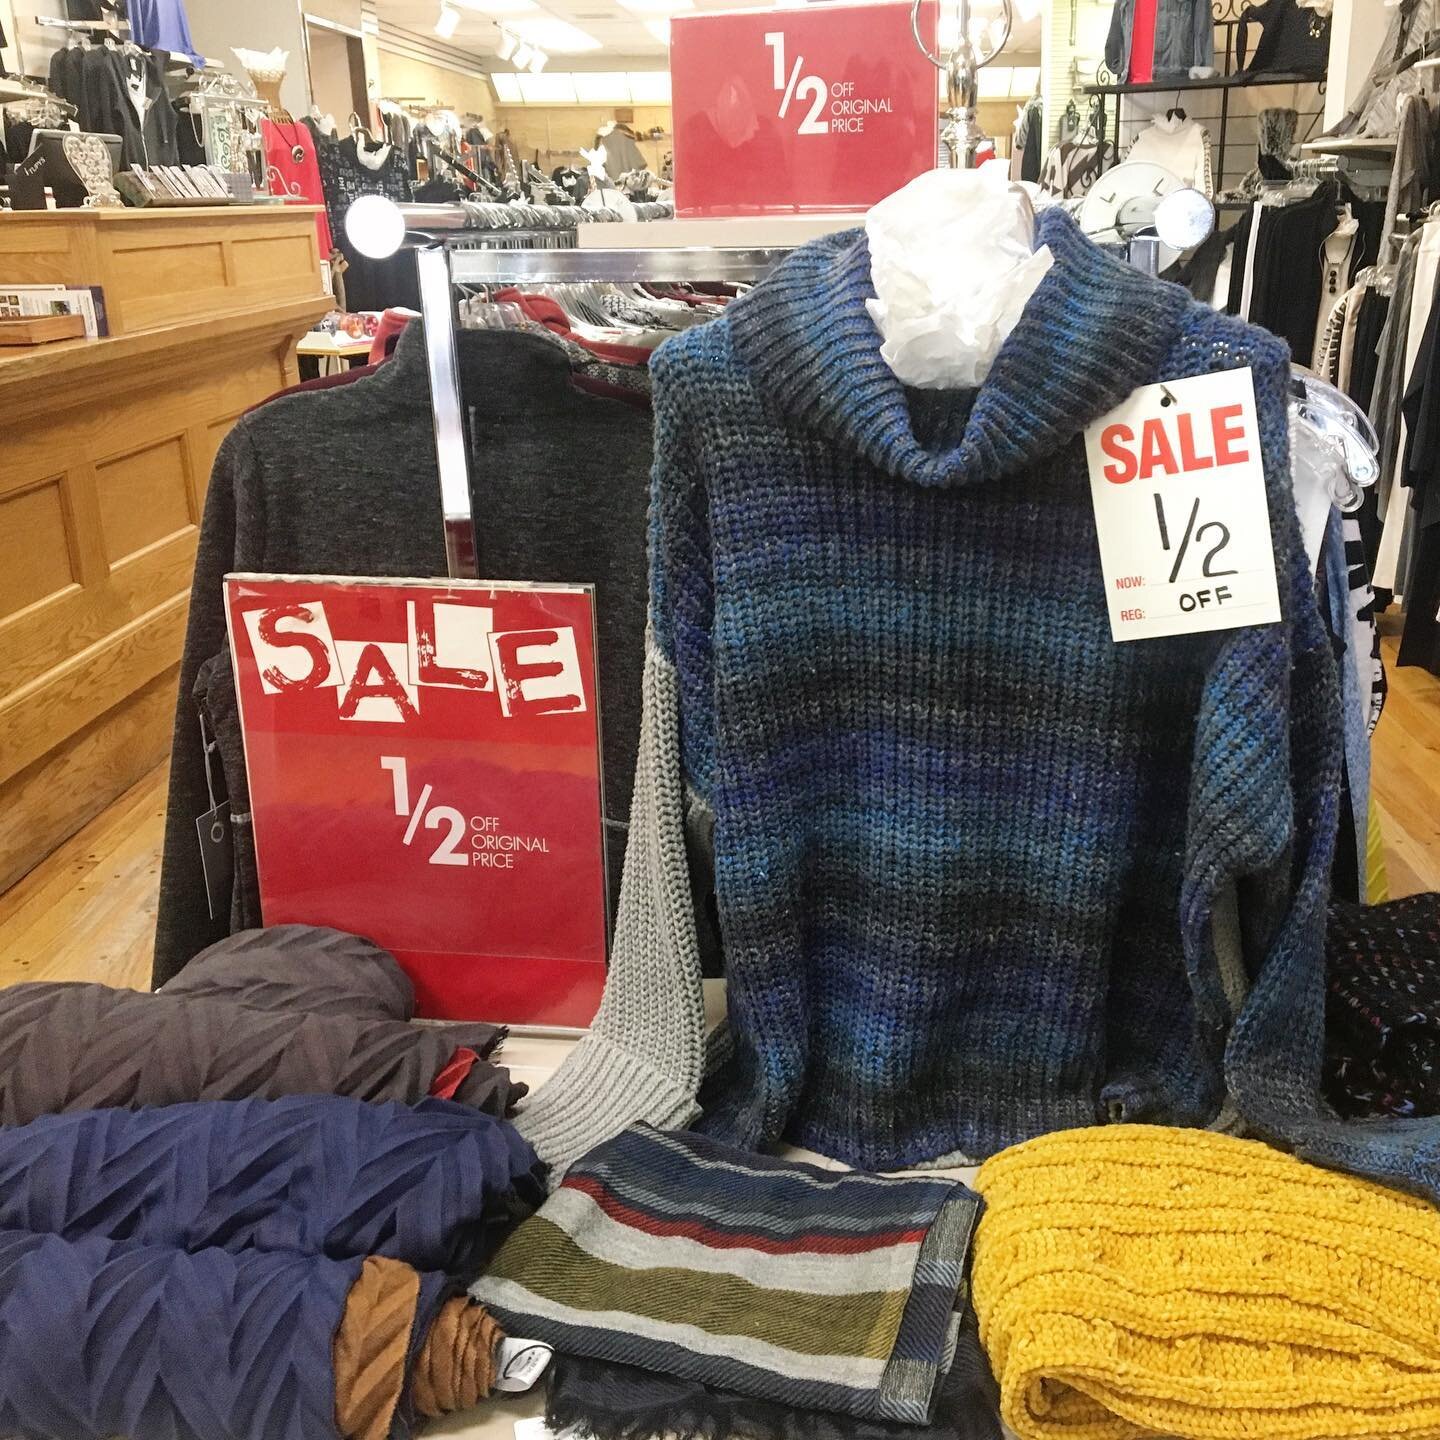 Our Winter Survivor Sale starts today! Fall/Winter merchandise now 1/2 off!! Still tons of cozy sweaters in stock ❤️ @decorahchamber #wintersale #retailtherapy